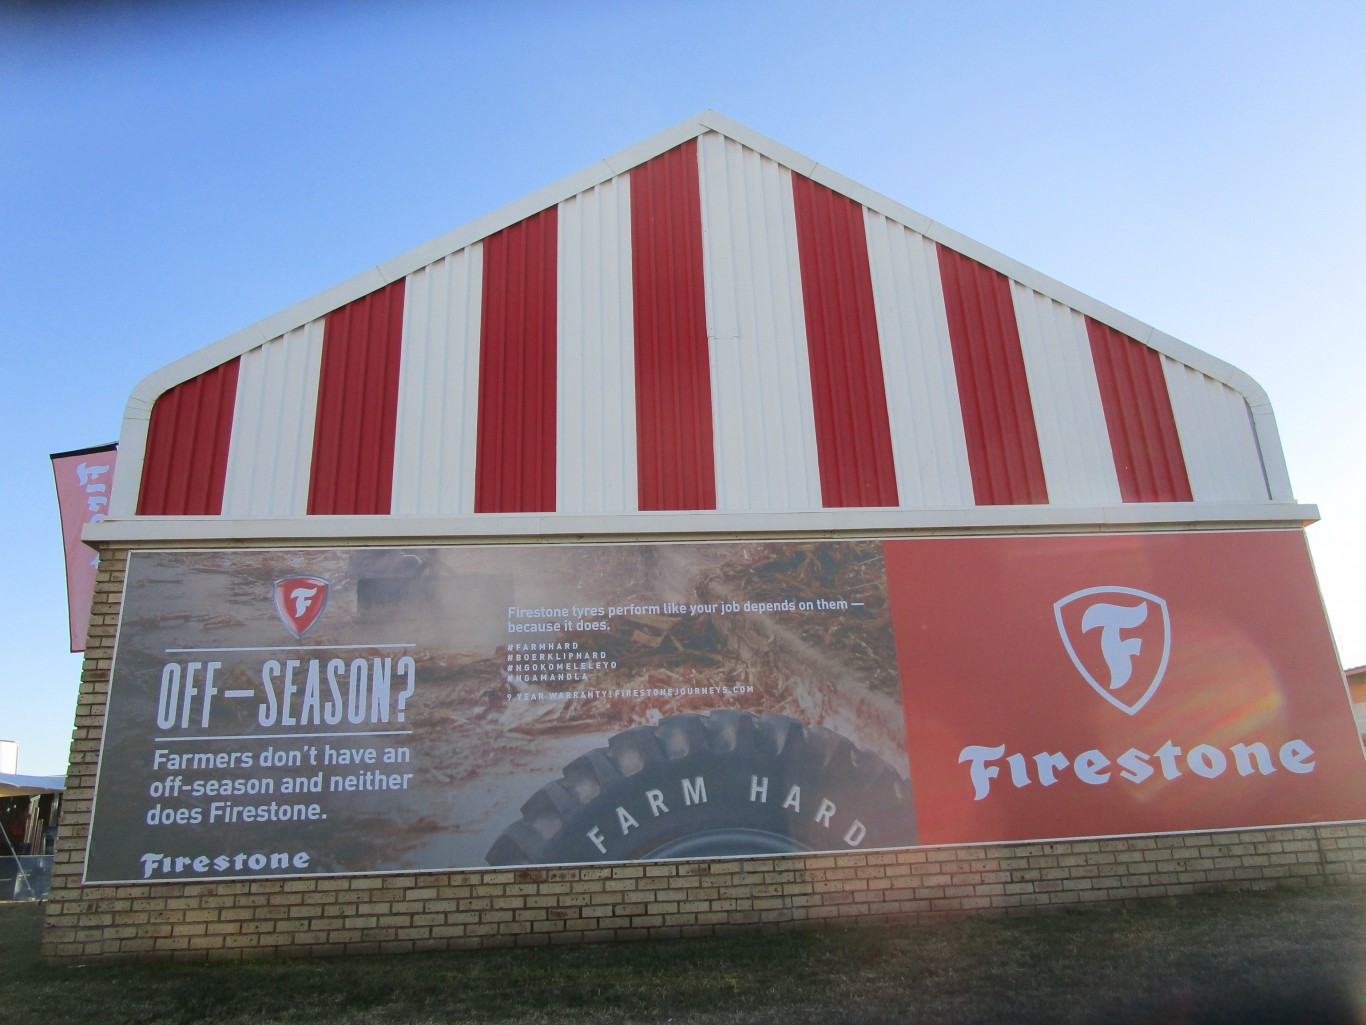 Firestone mix business and pleasure at Nampo Harvest Day